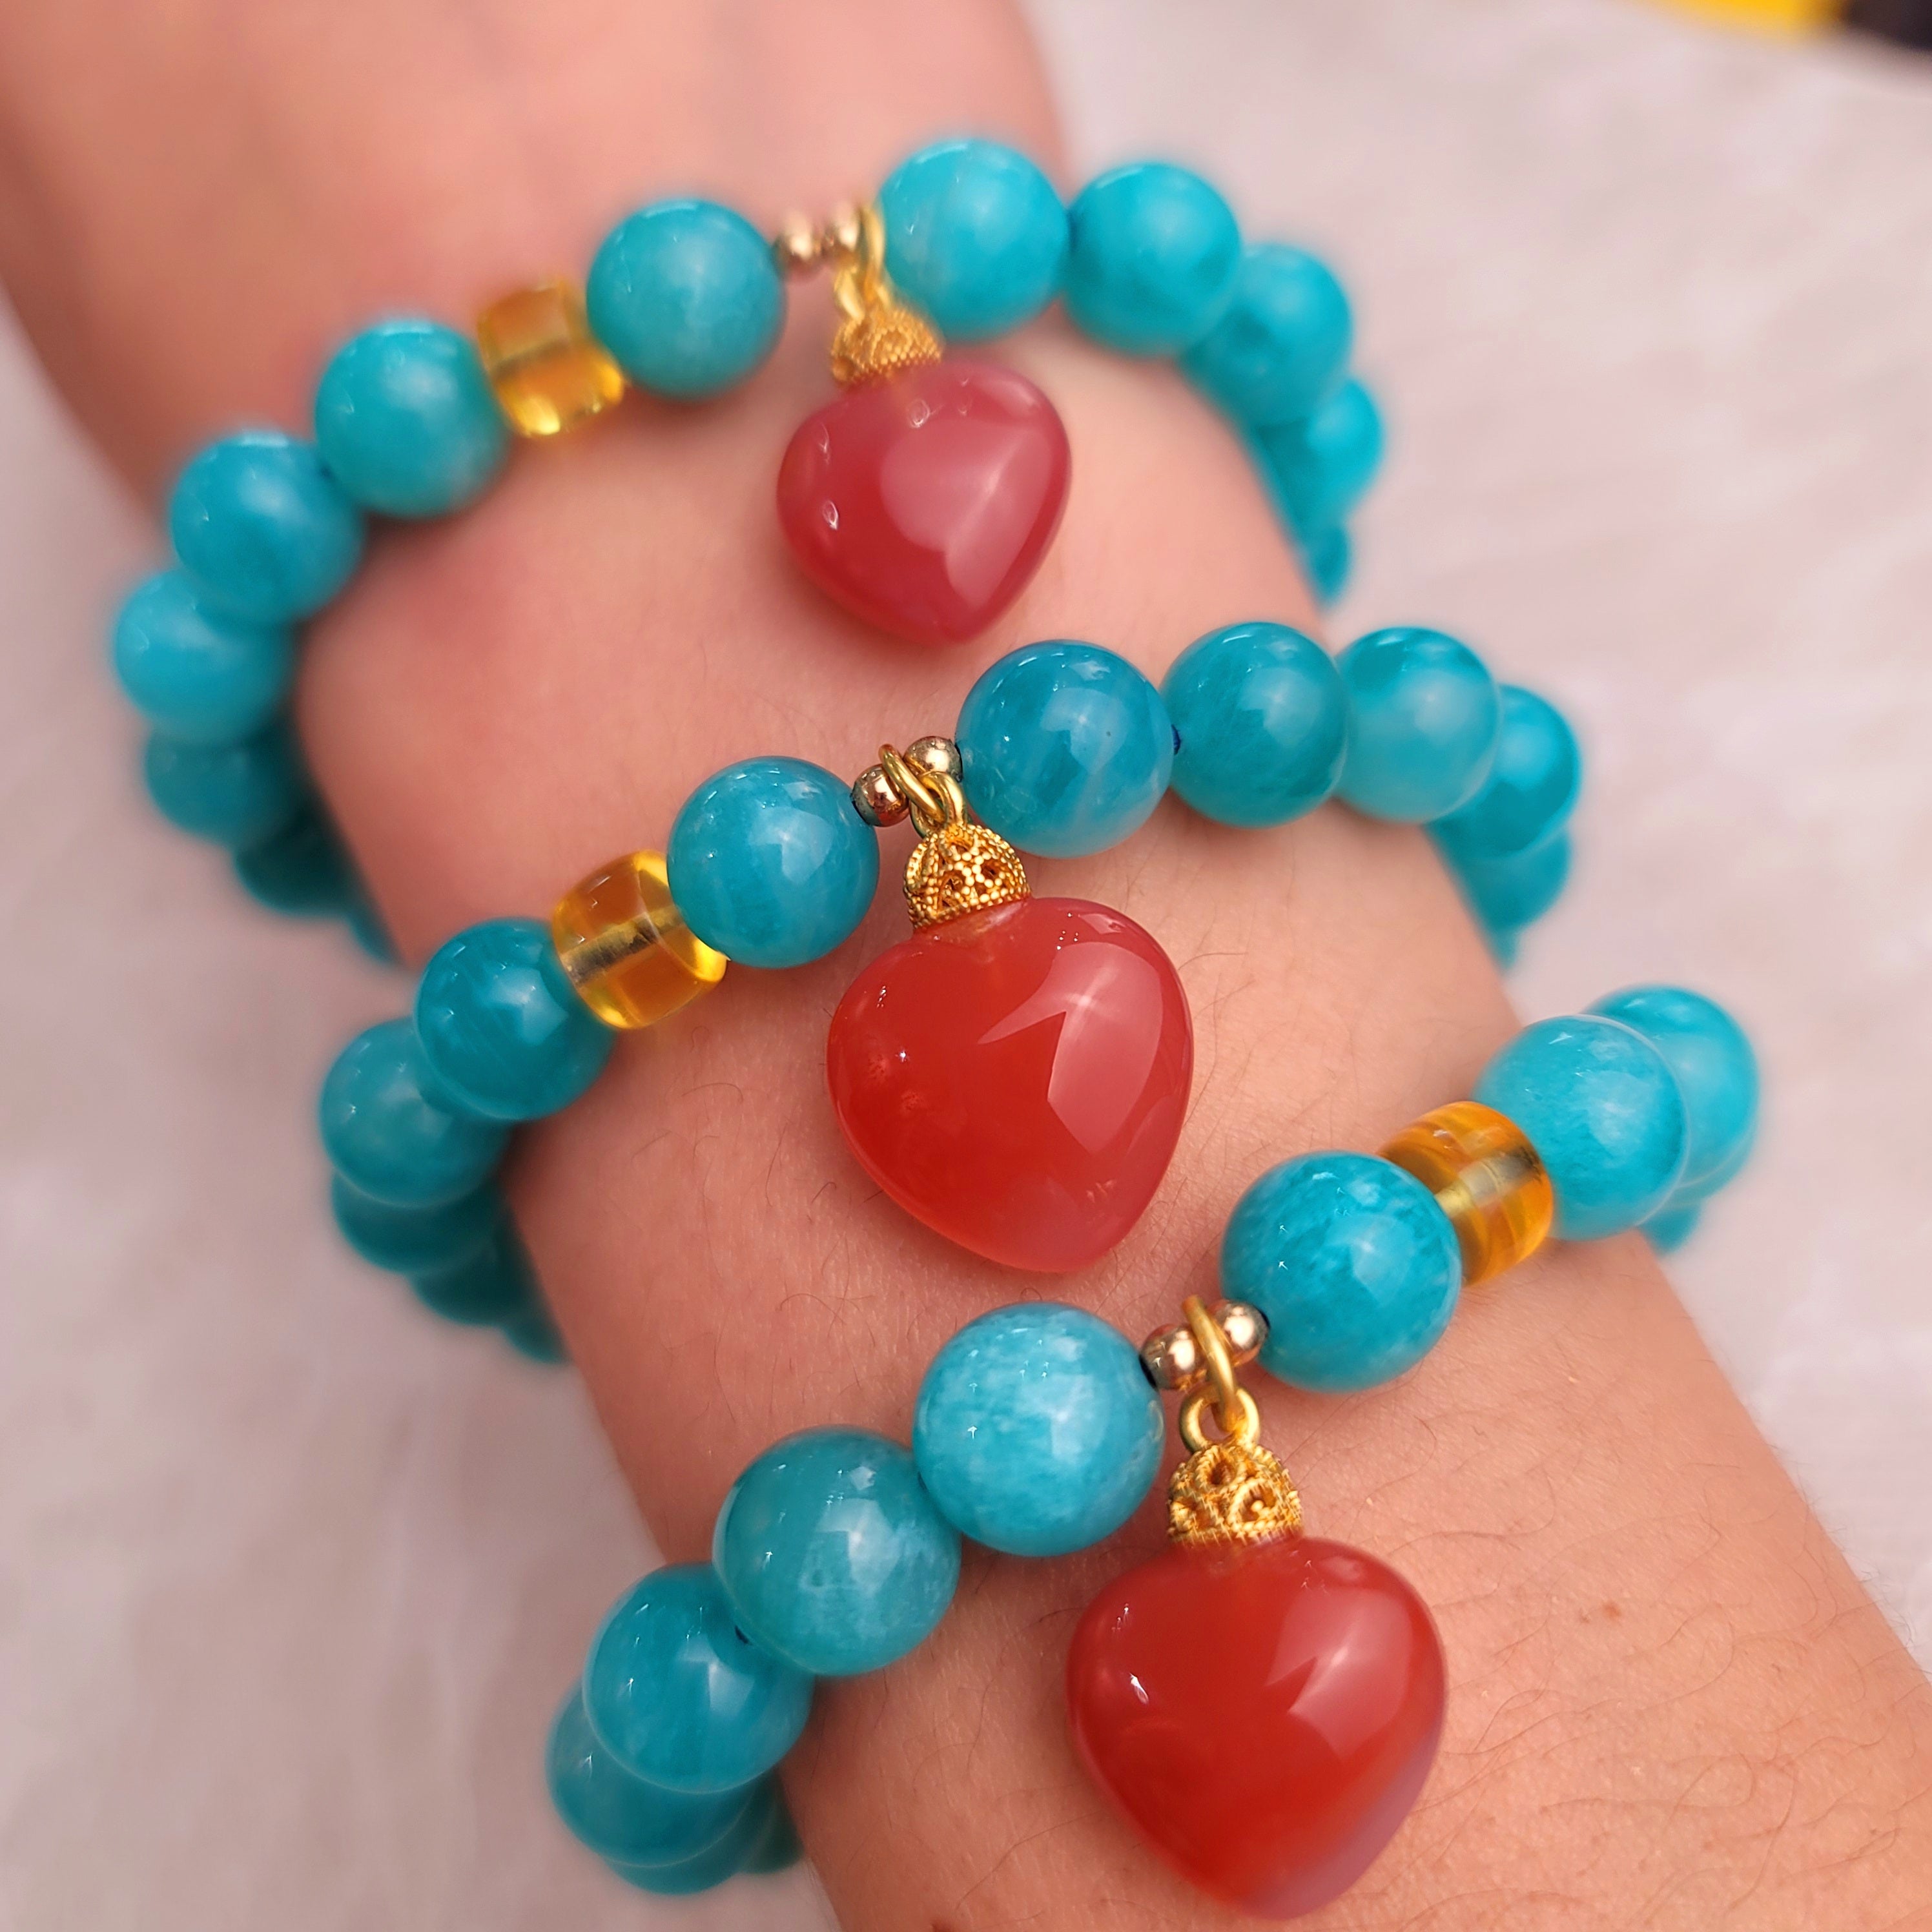 Amazonite with Yanyuan Heart Charm and Amber Bracelet for Speaking Your Truth